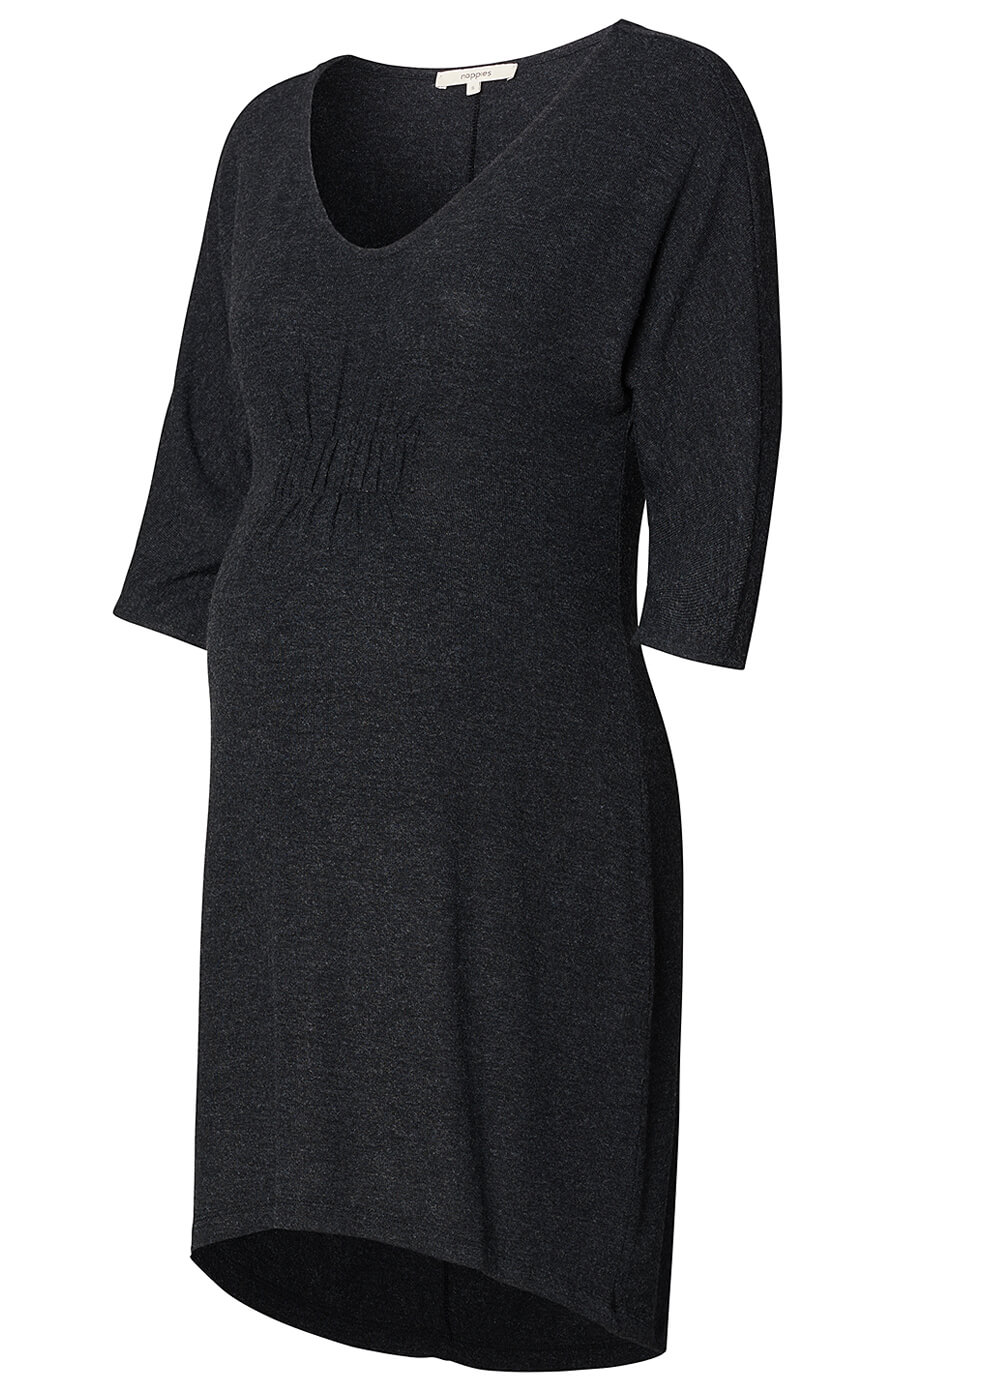 Gigi Maternity Knit Tunic in Anthracite by Noppies